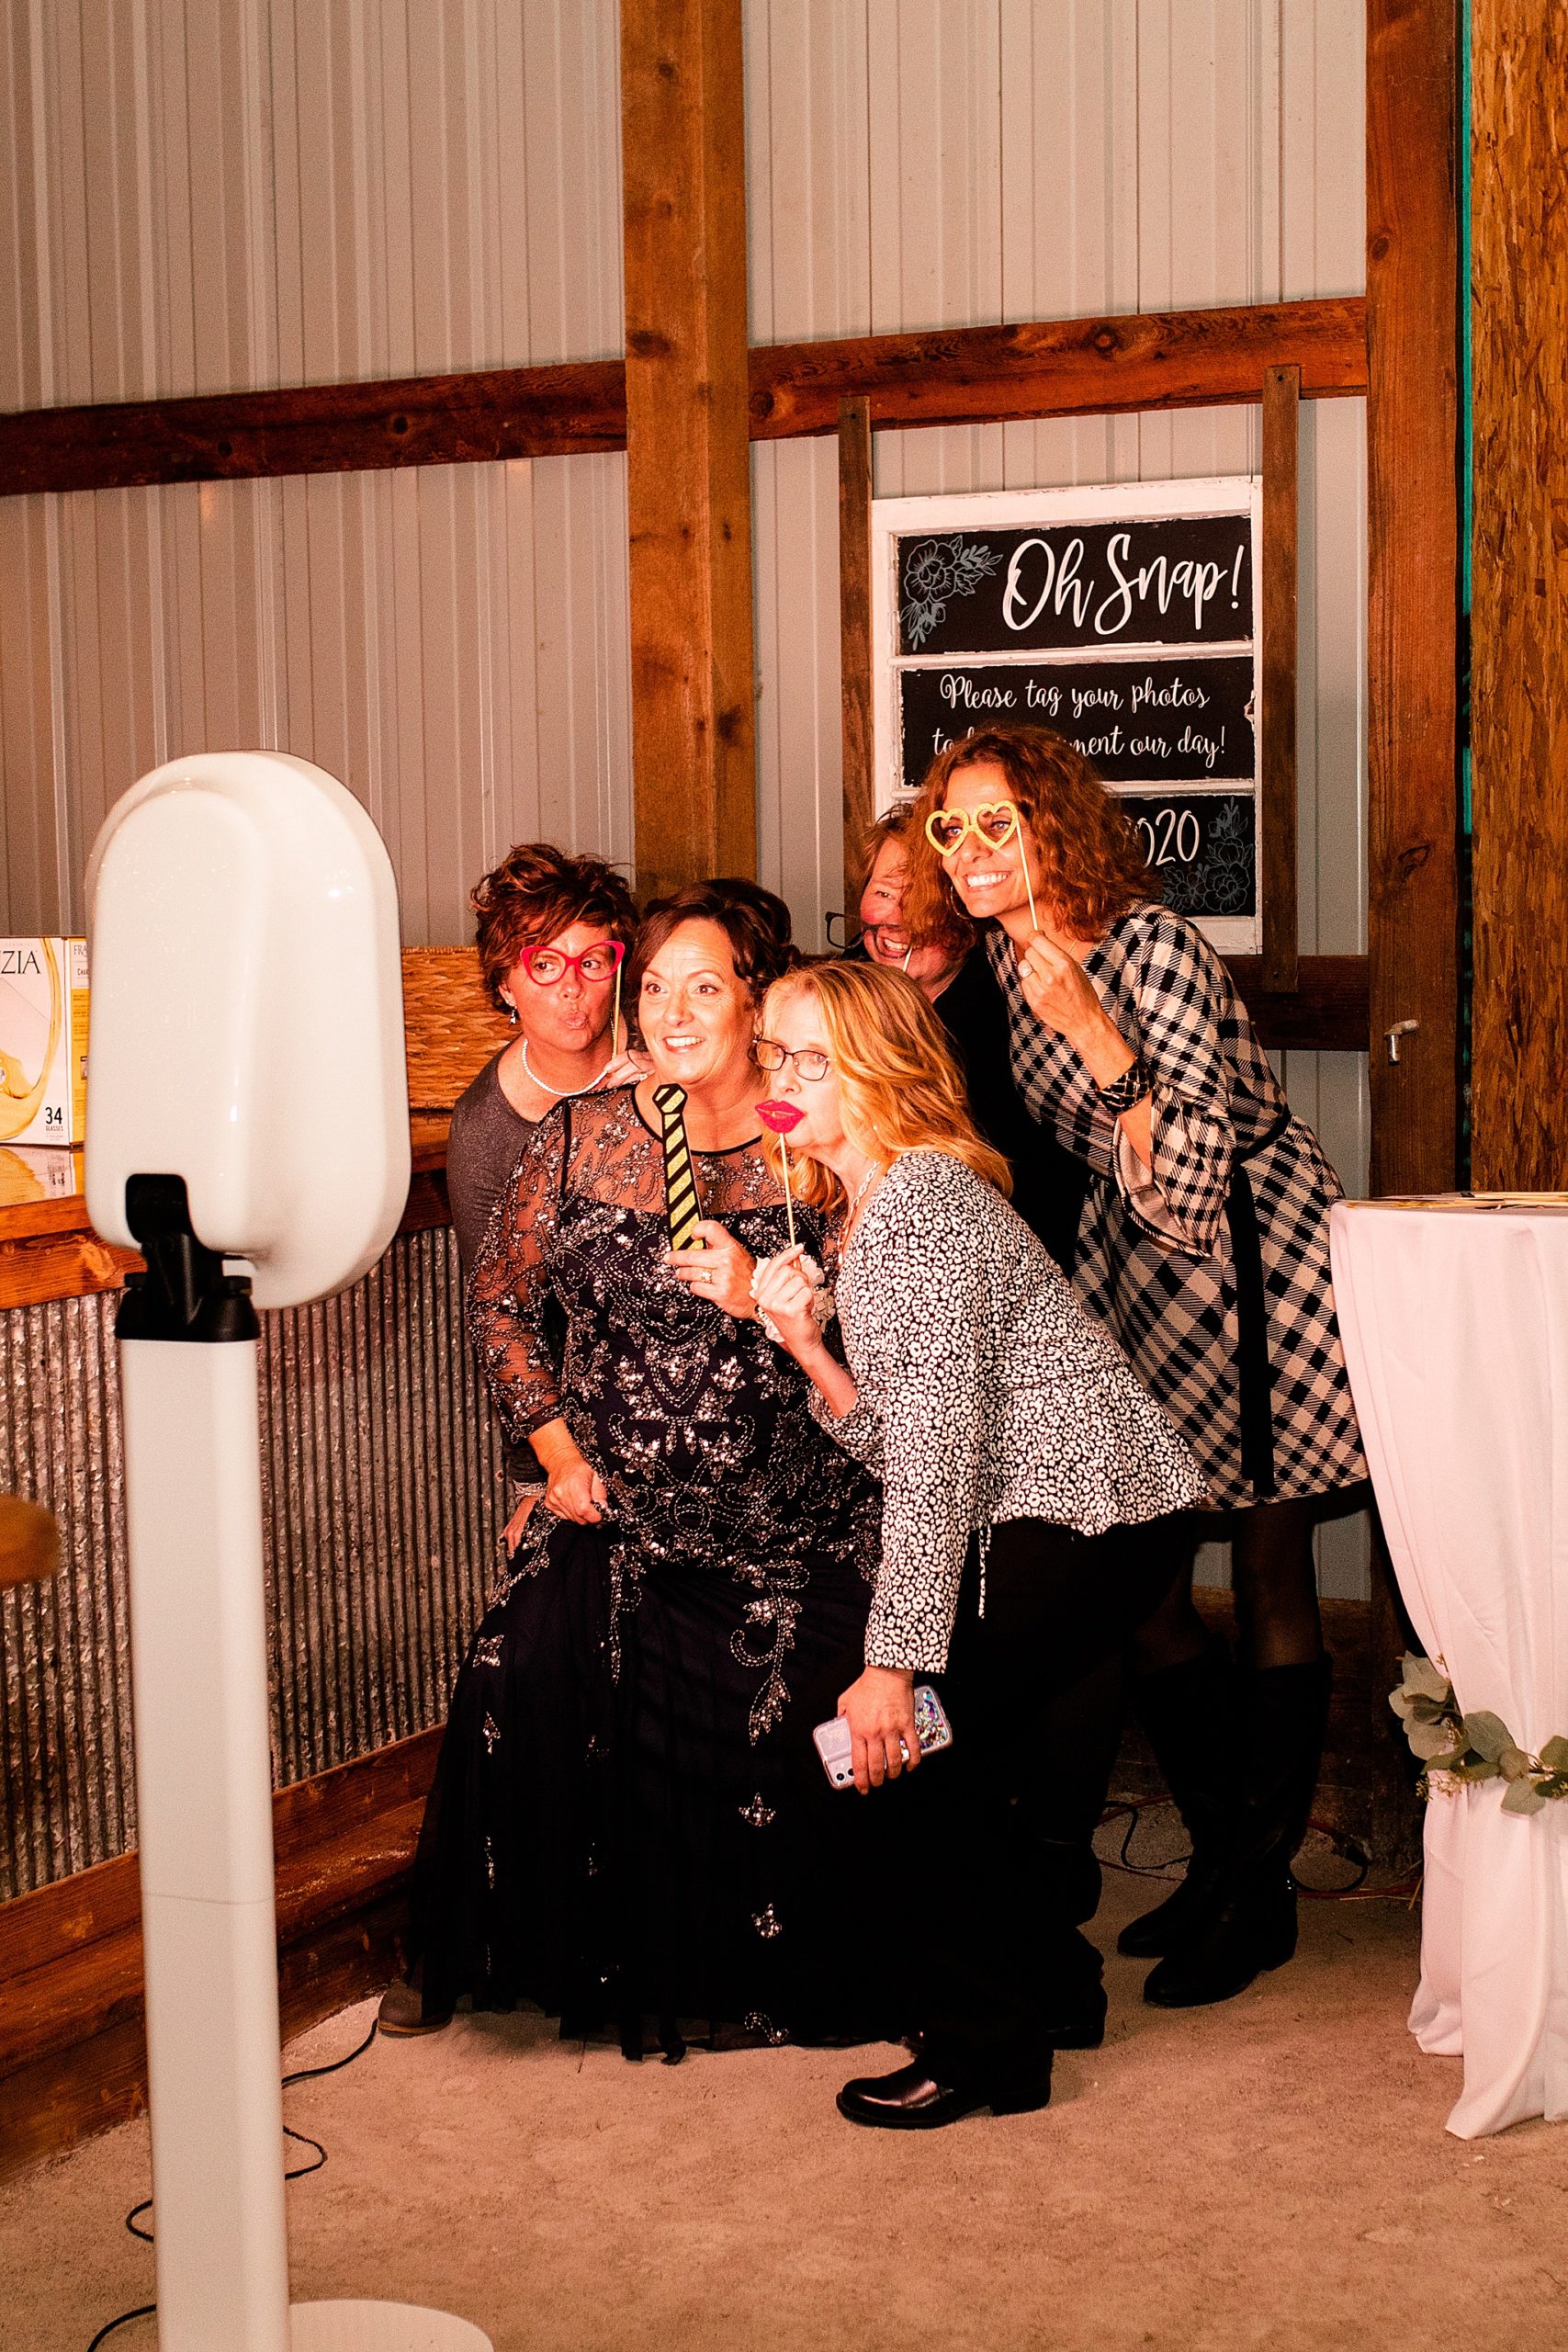 Why you need a photo booth at your wedding